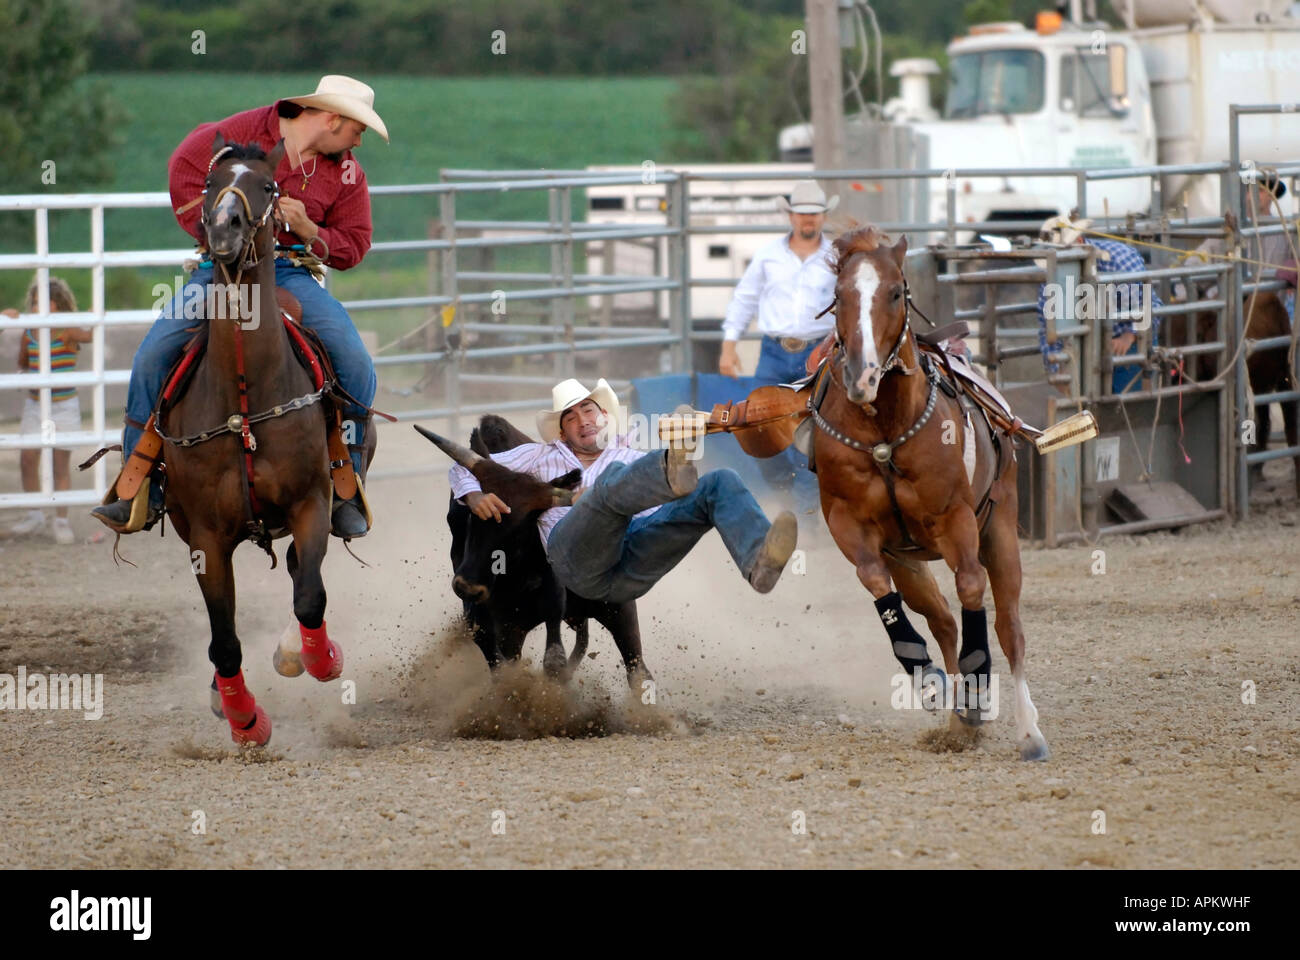 Cowboys participate in Rodeo bull dogging event Stock Photo